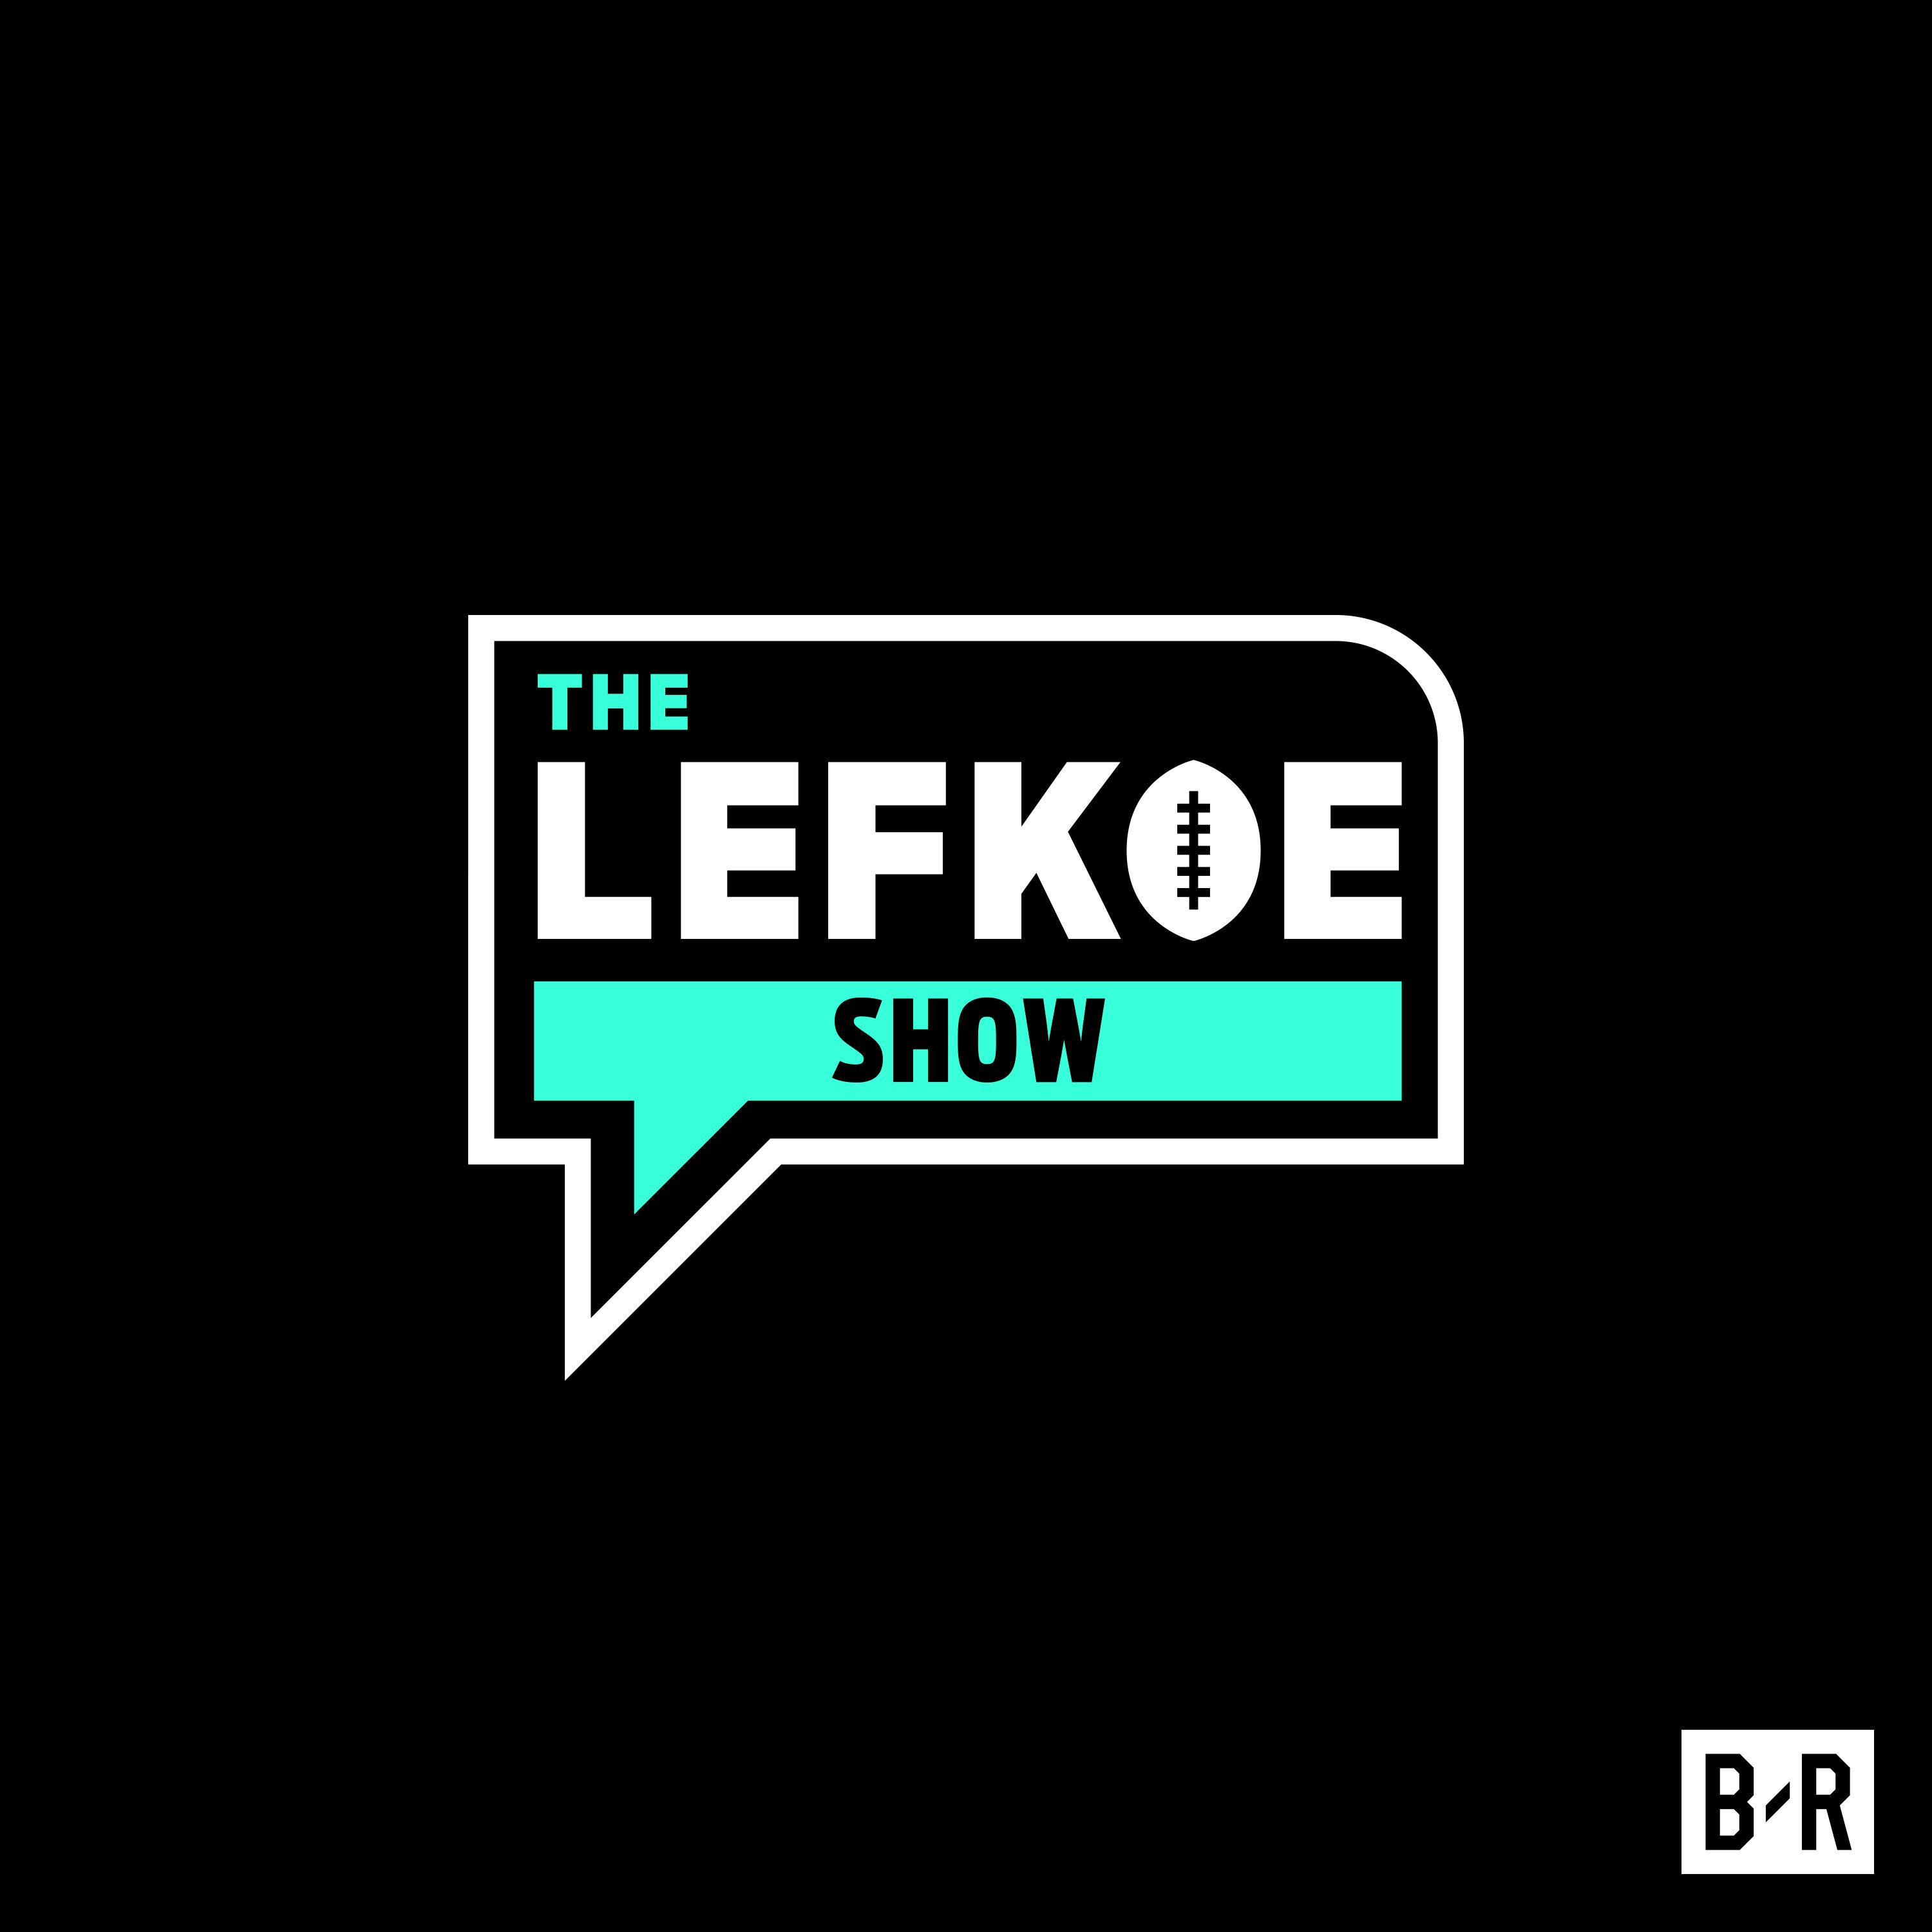 4th-and-1 Calls, Panthermania, and Undefeated Russ: Week 5 Breakdown with Brian Westbrook | The Lefkoe Show